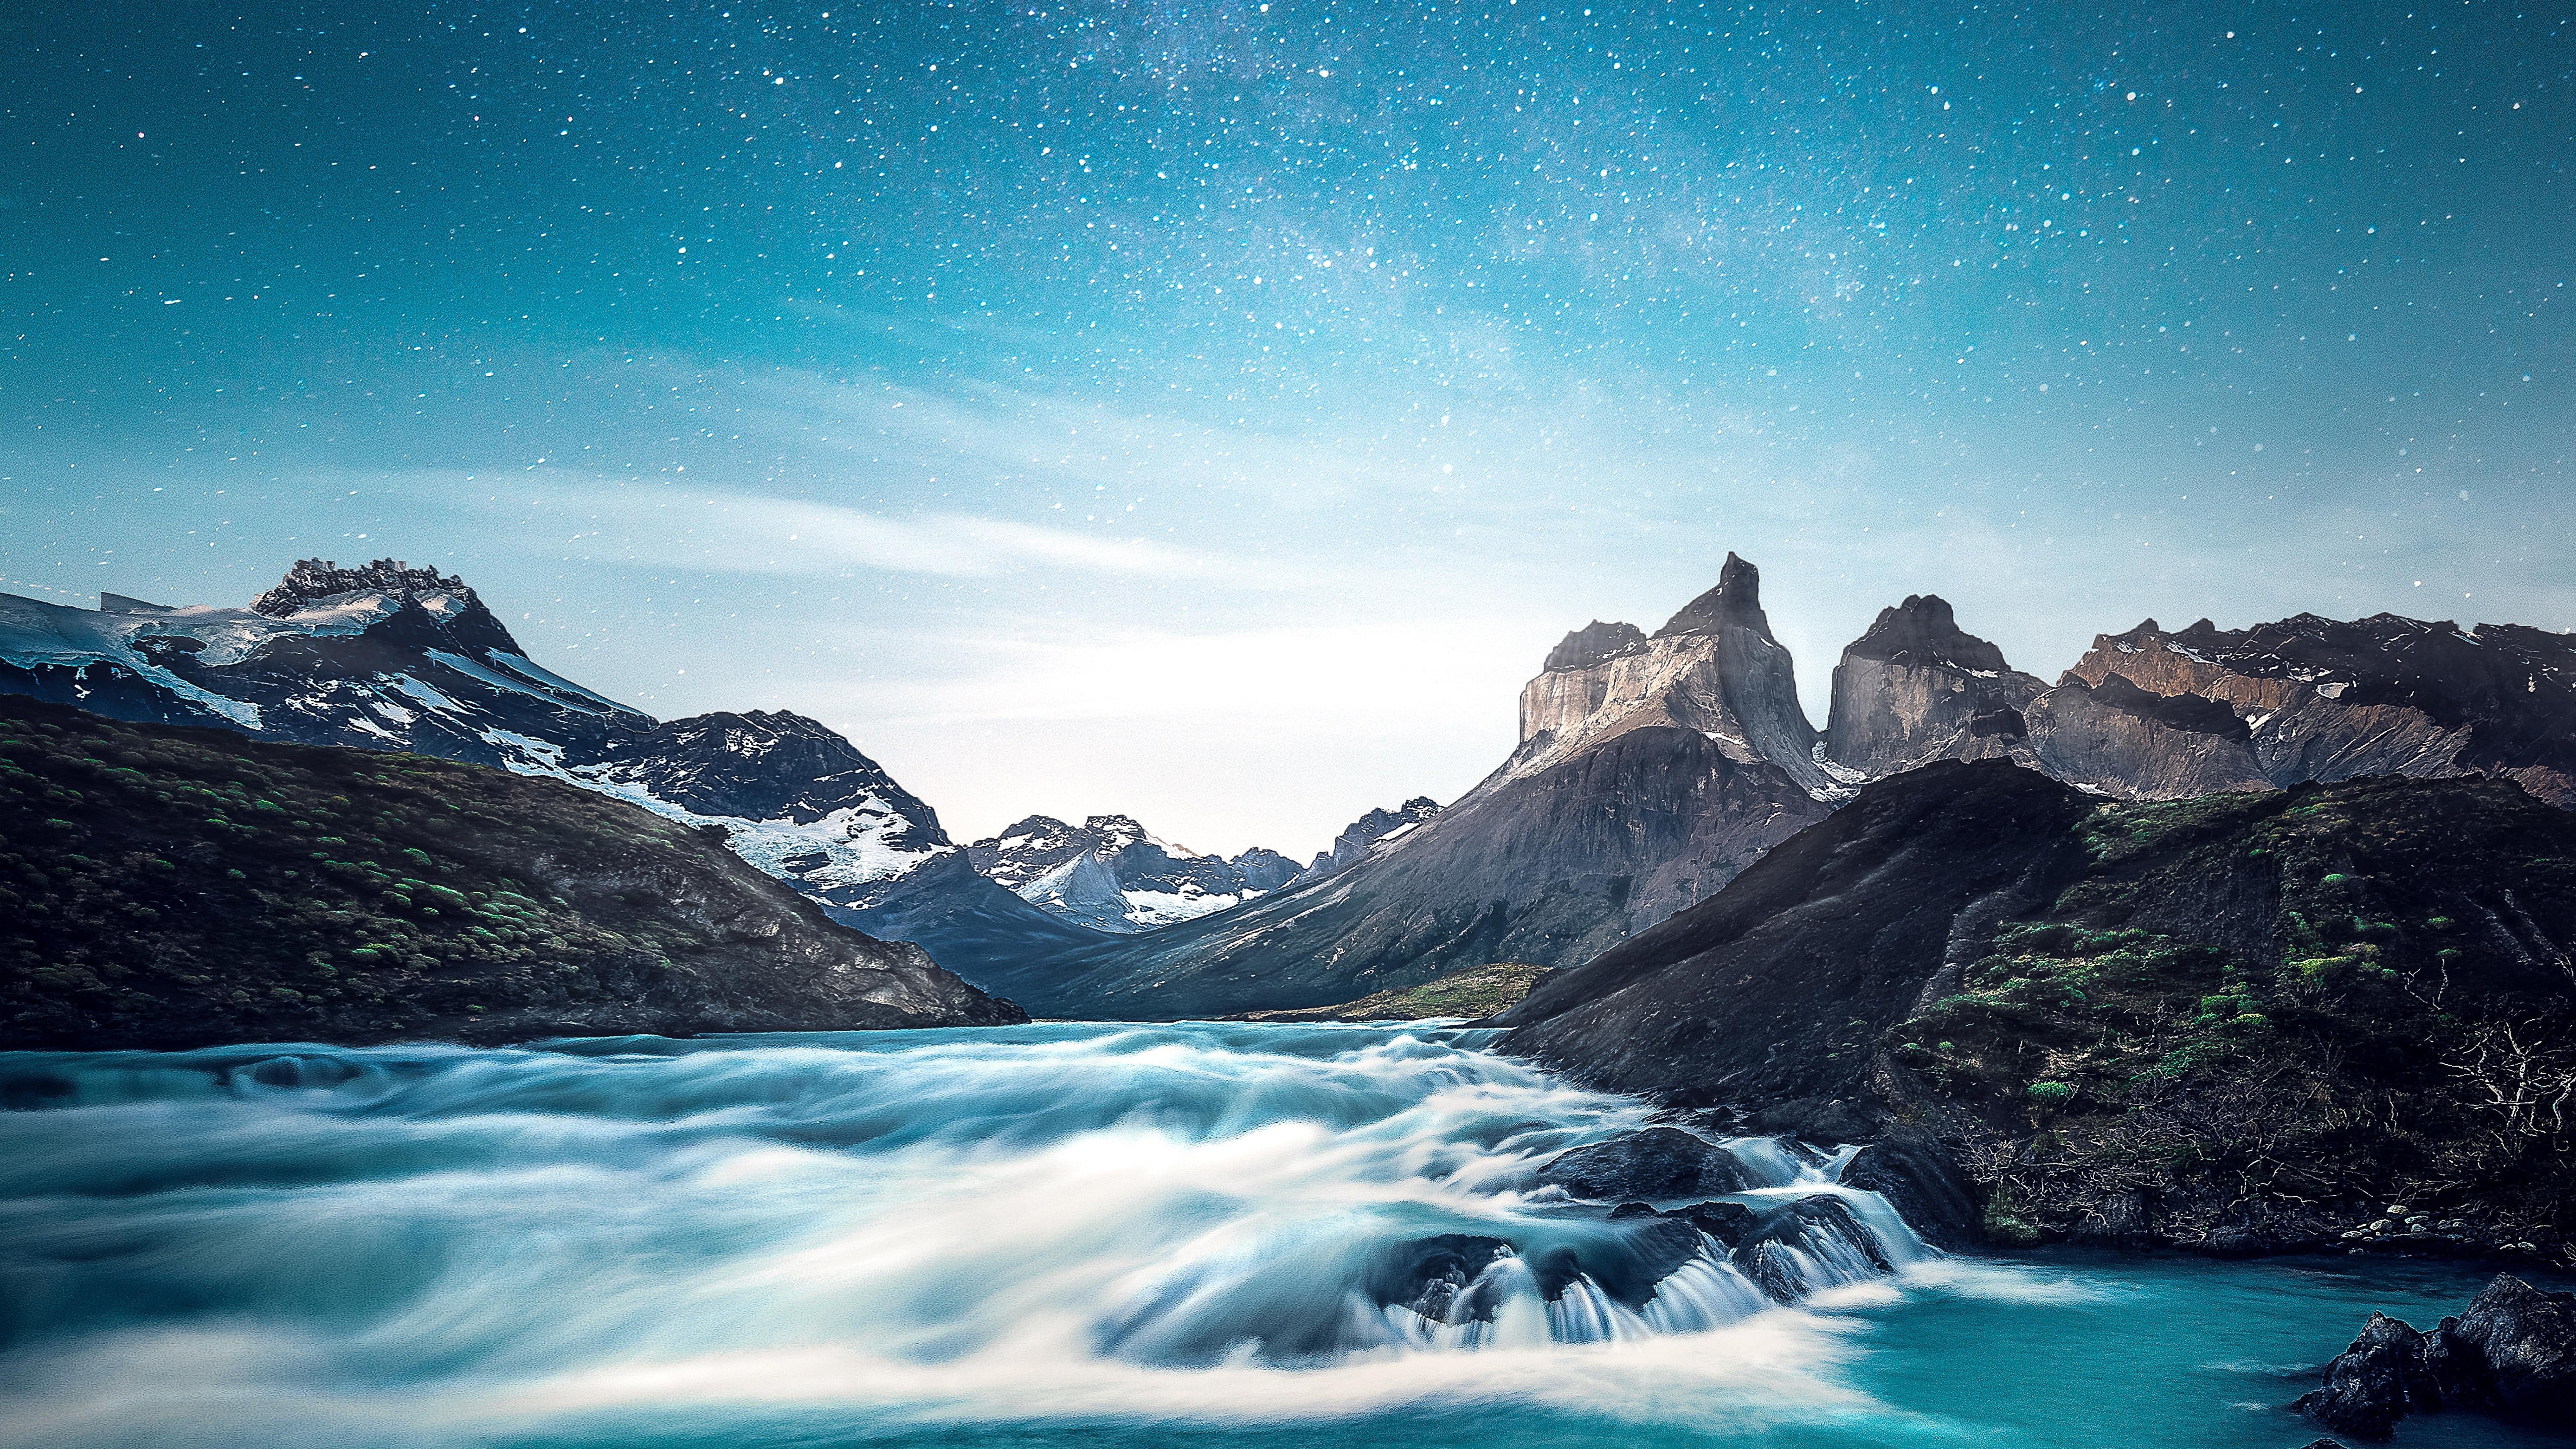 Mountains With River And Stars Wallpaper 8k Ultra HD Id